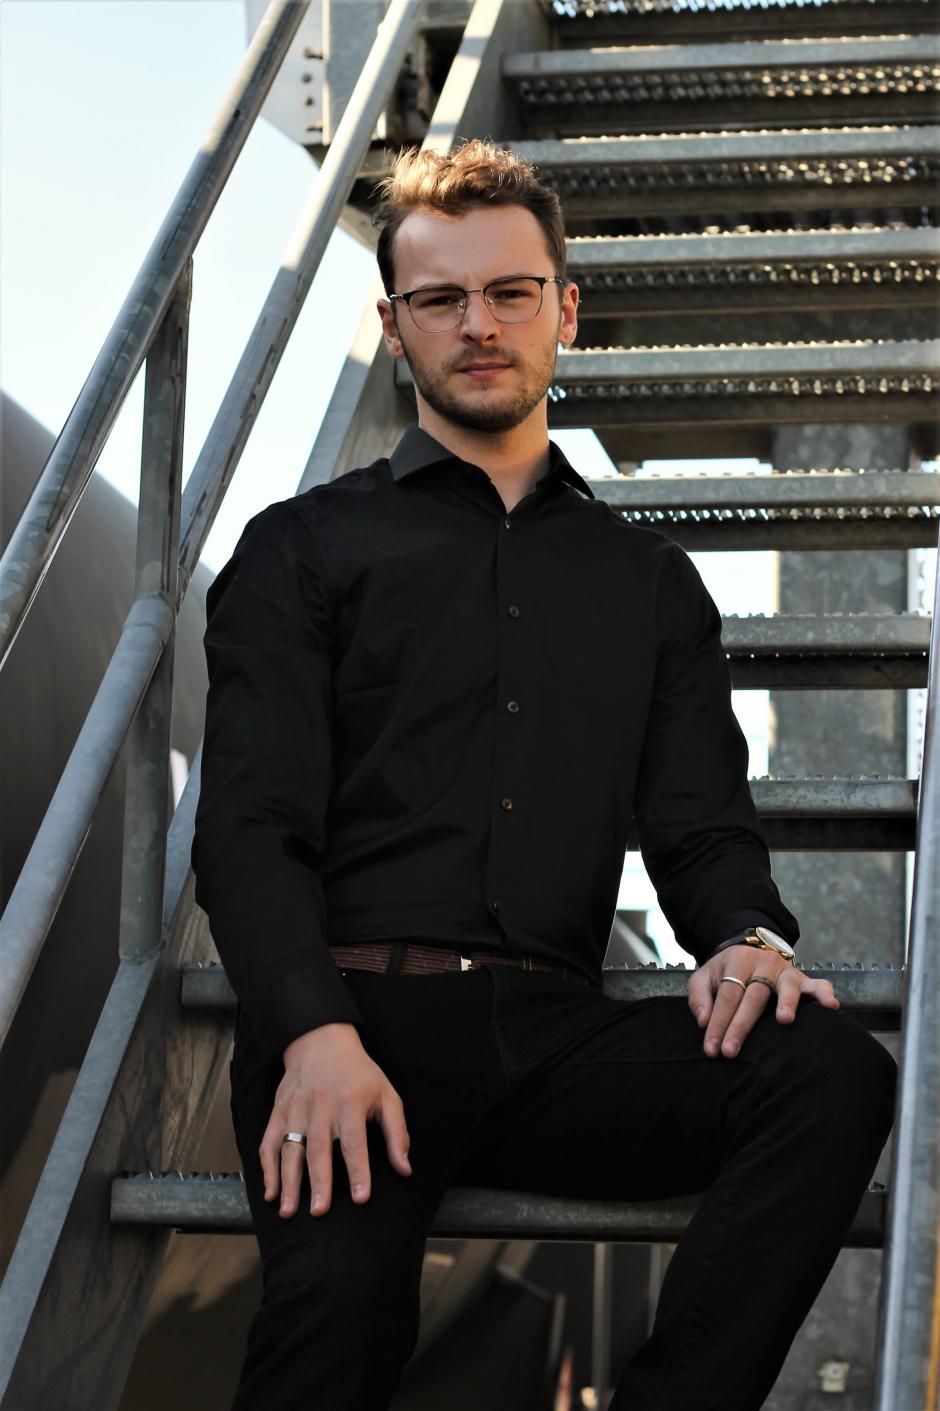 Ethan sits on metal stairs outdoors looking at the camera wearing a dress shirt and dress pants, all black.